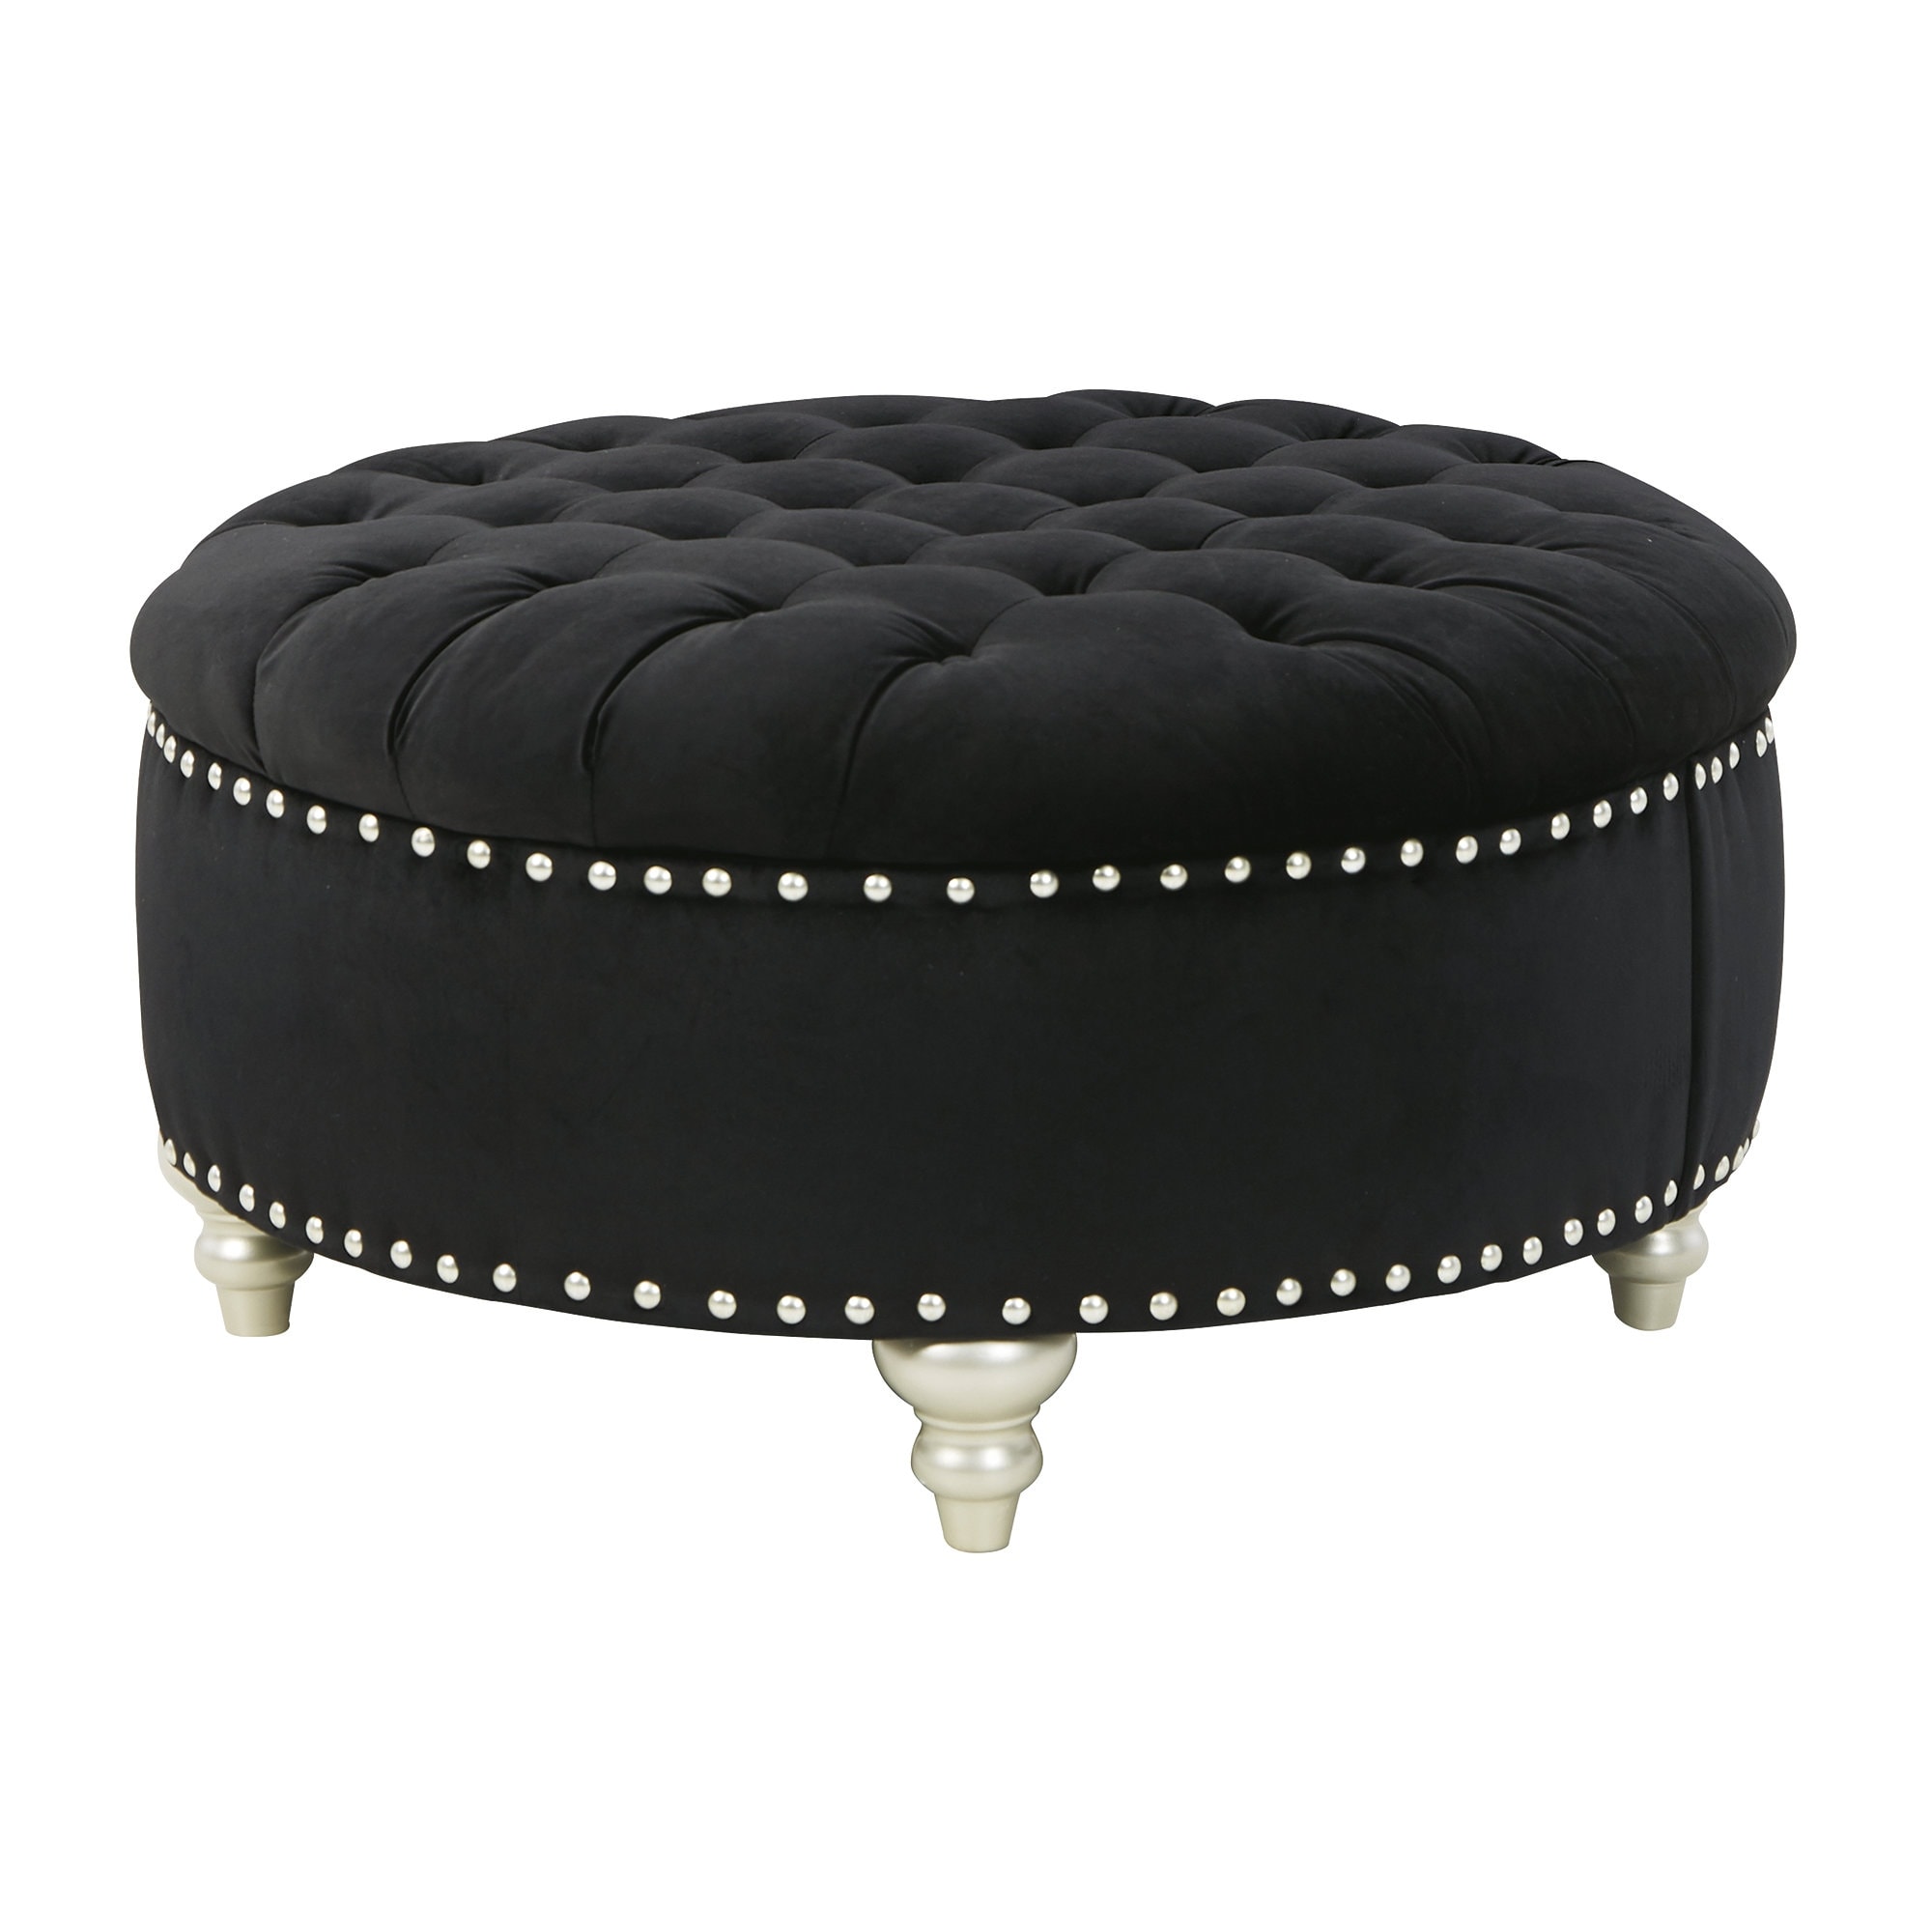 Signature Design by Ashley Harriotte Black/Gray Oversized Accent Ottoman